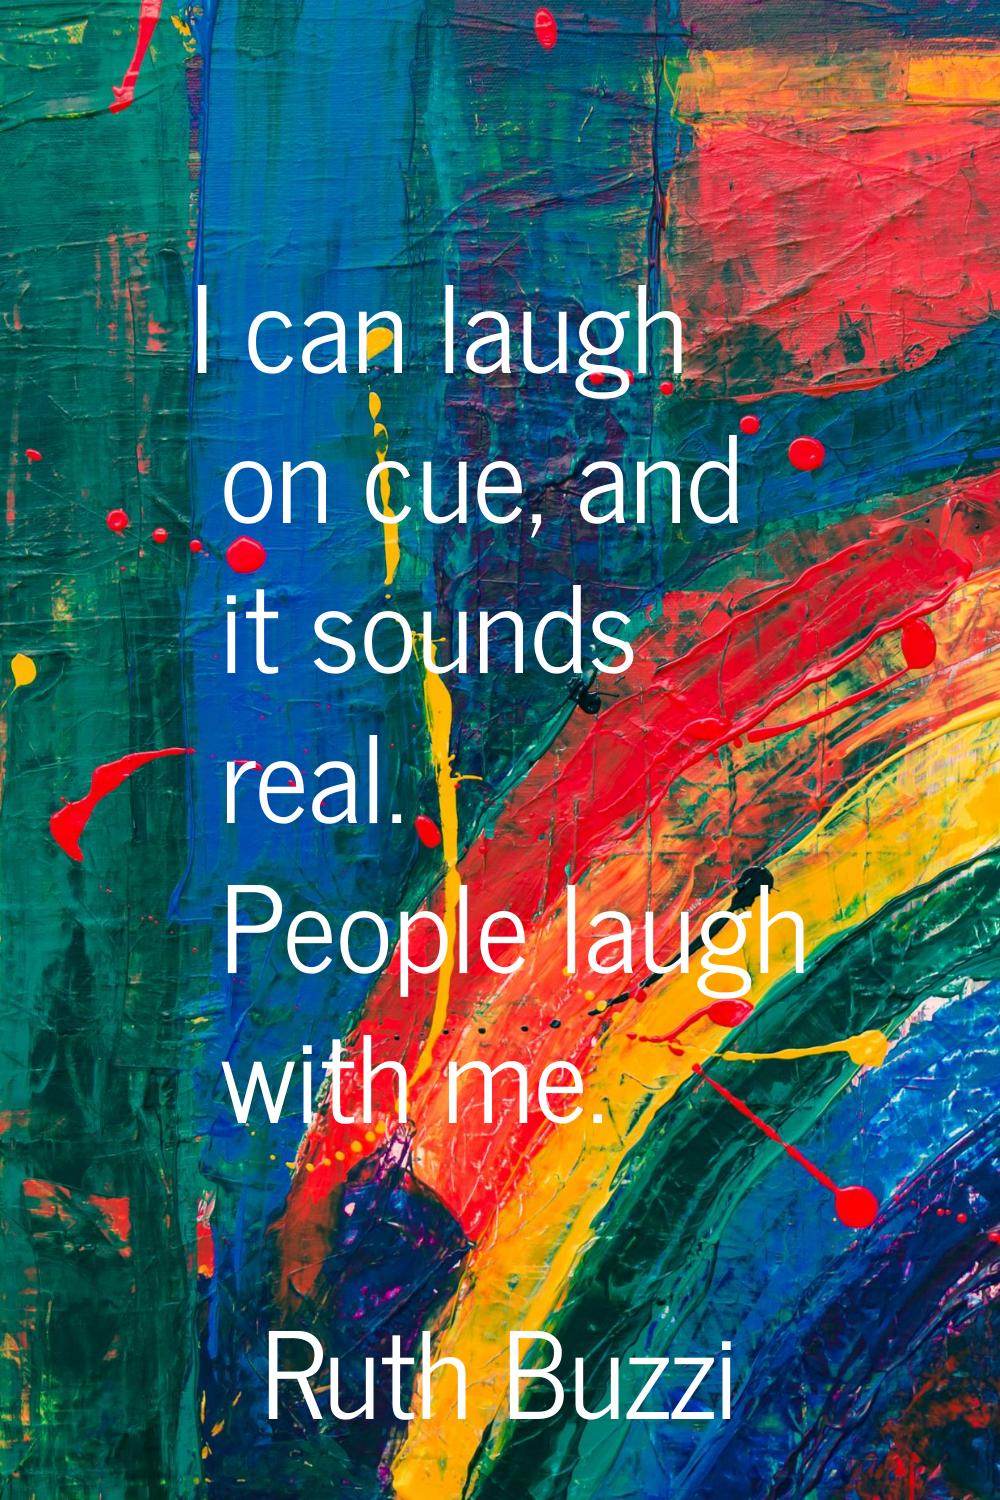 I can laugh on cue, and it sounds real. People laugh with me.